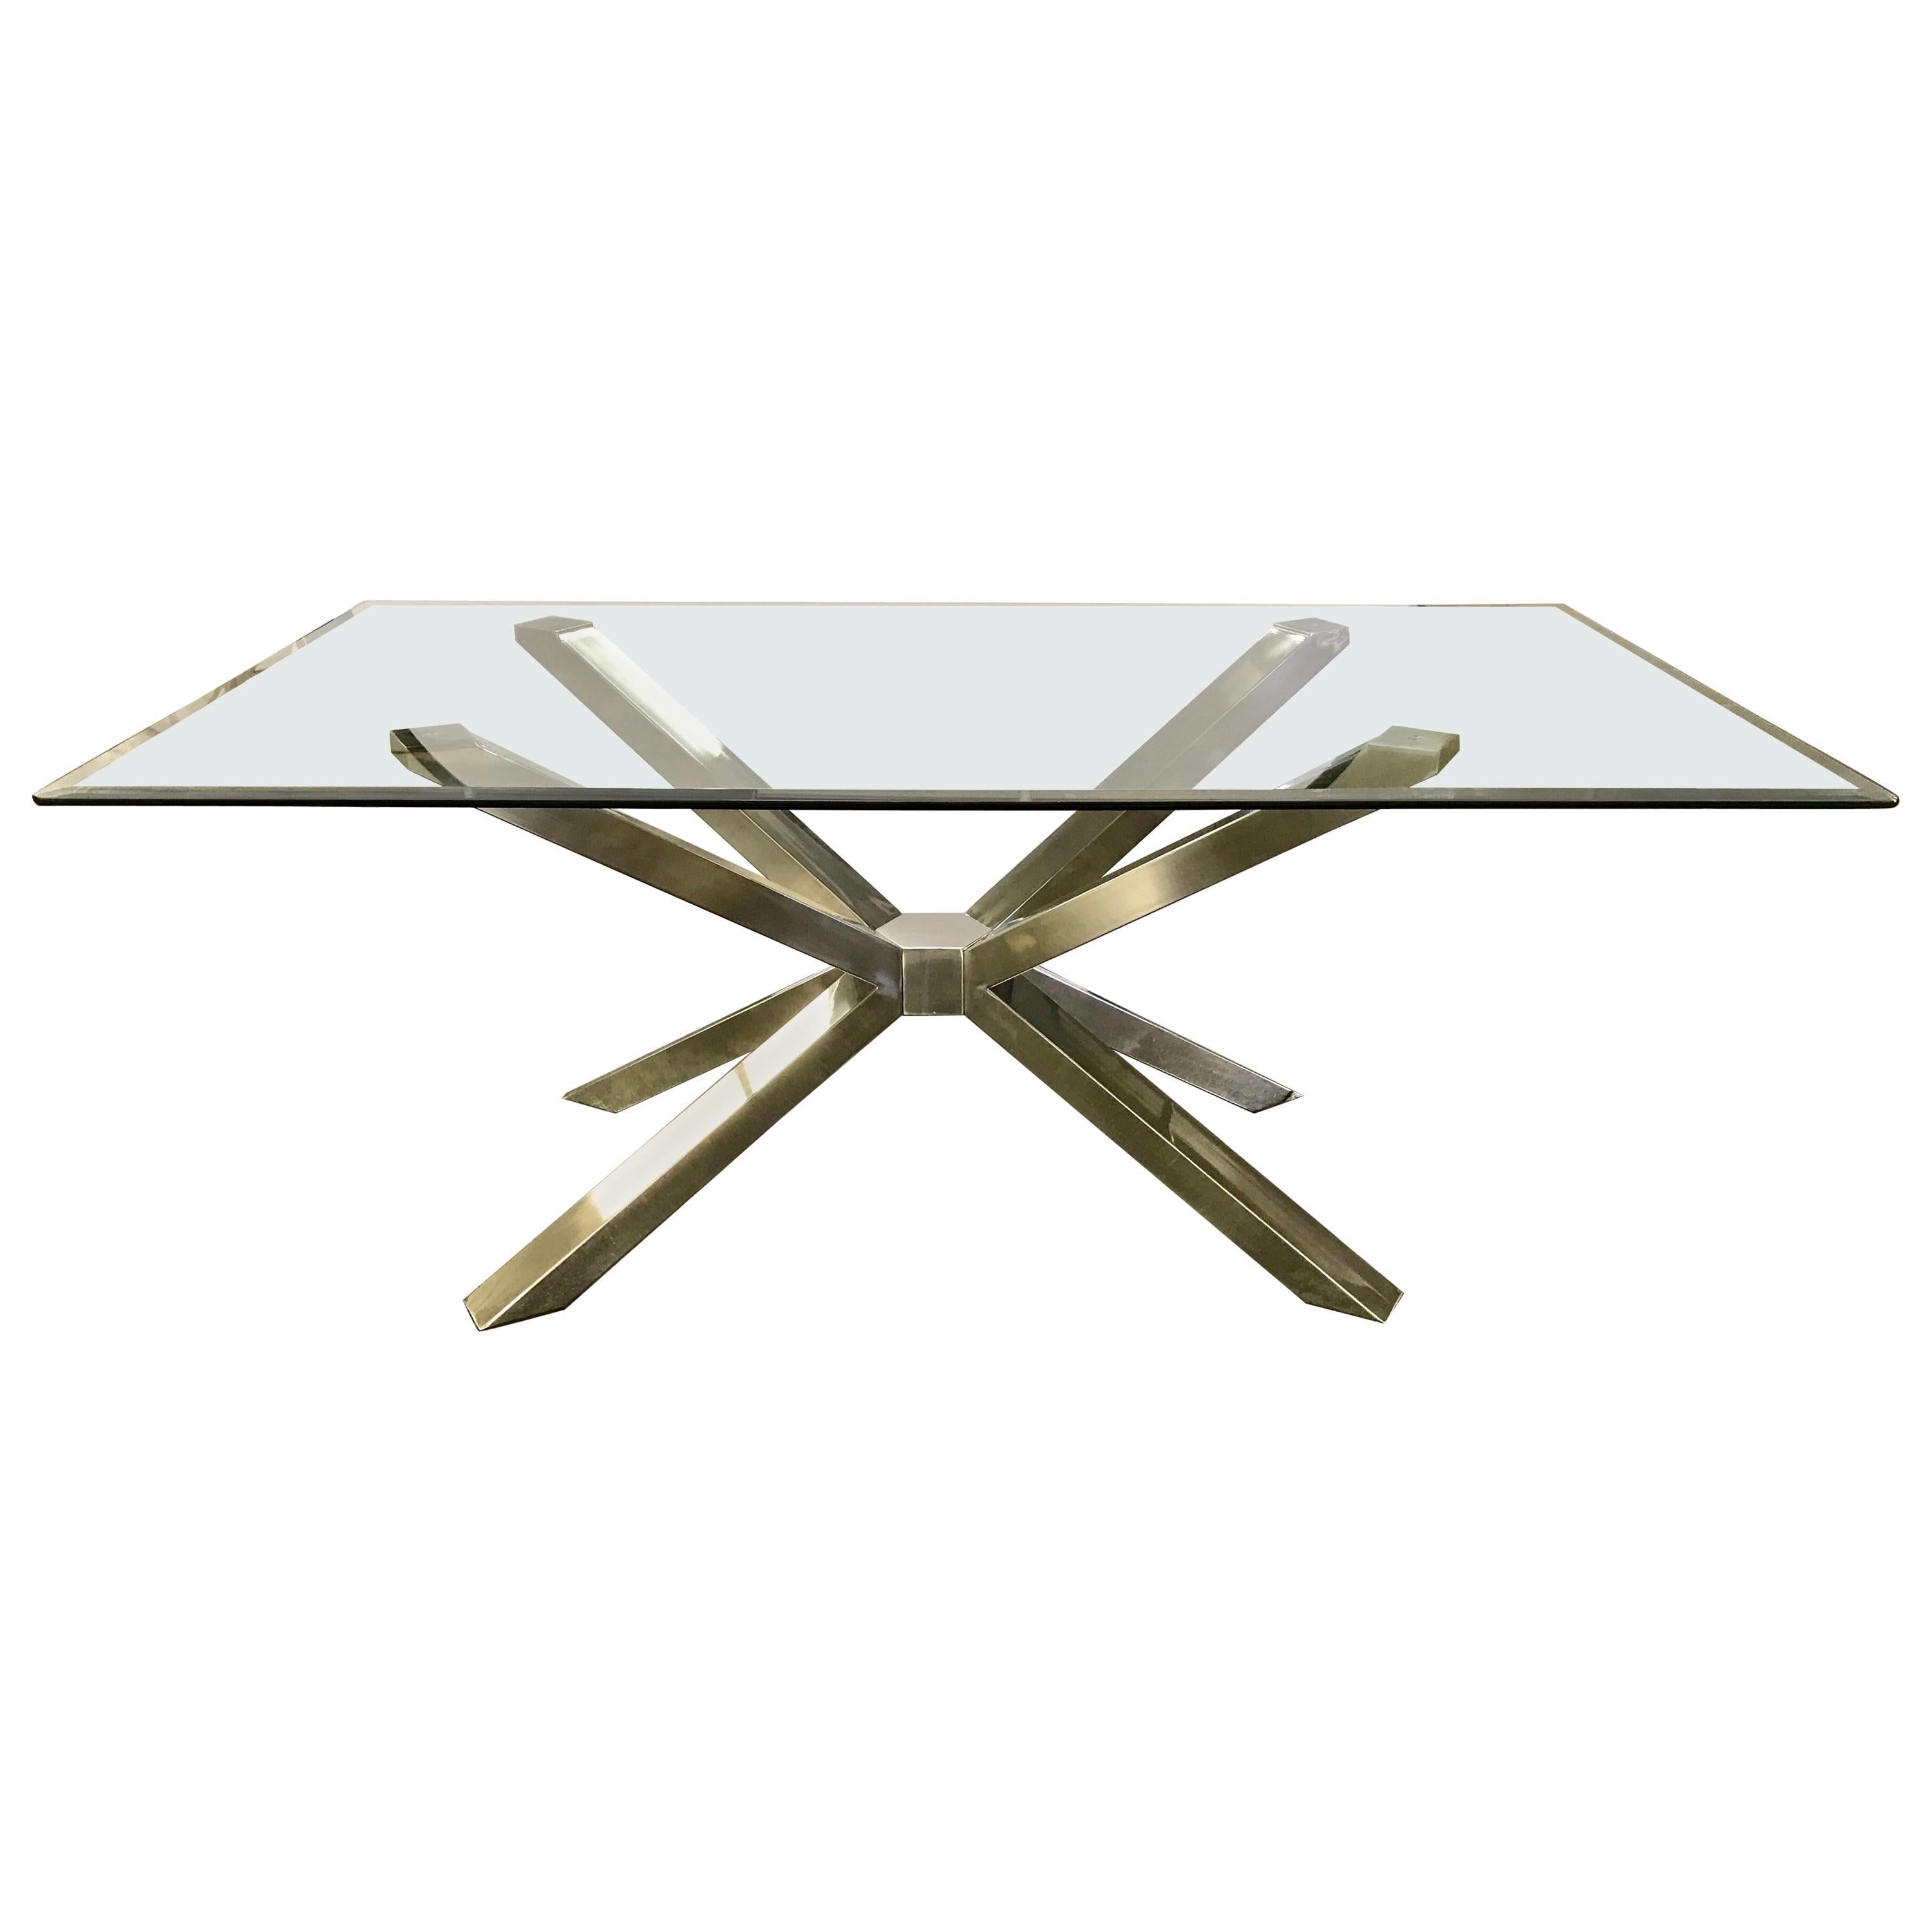 Mid-Century Modern Style Glass and Chrome Sculptural Dining Table